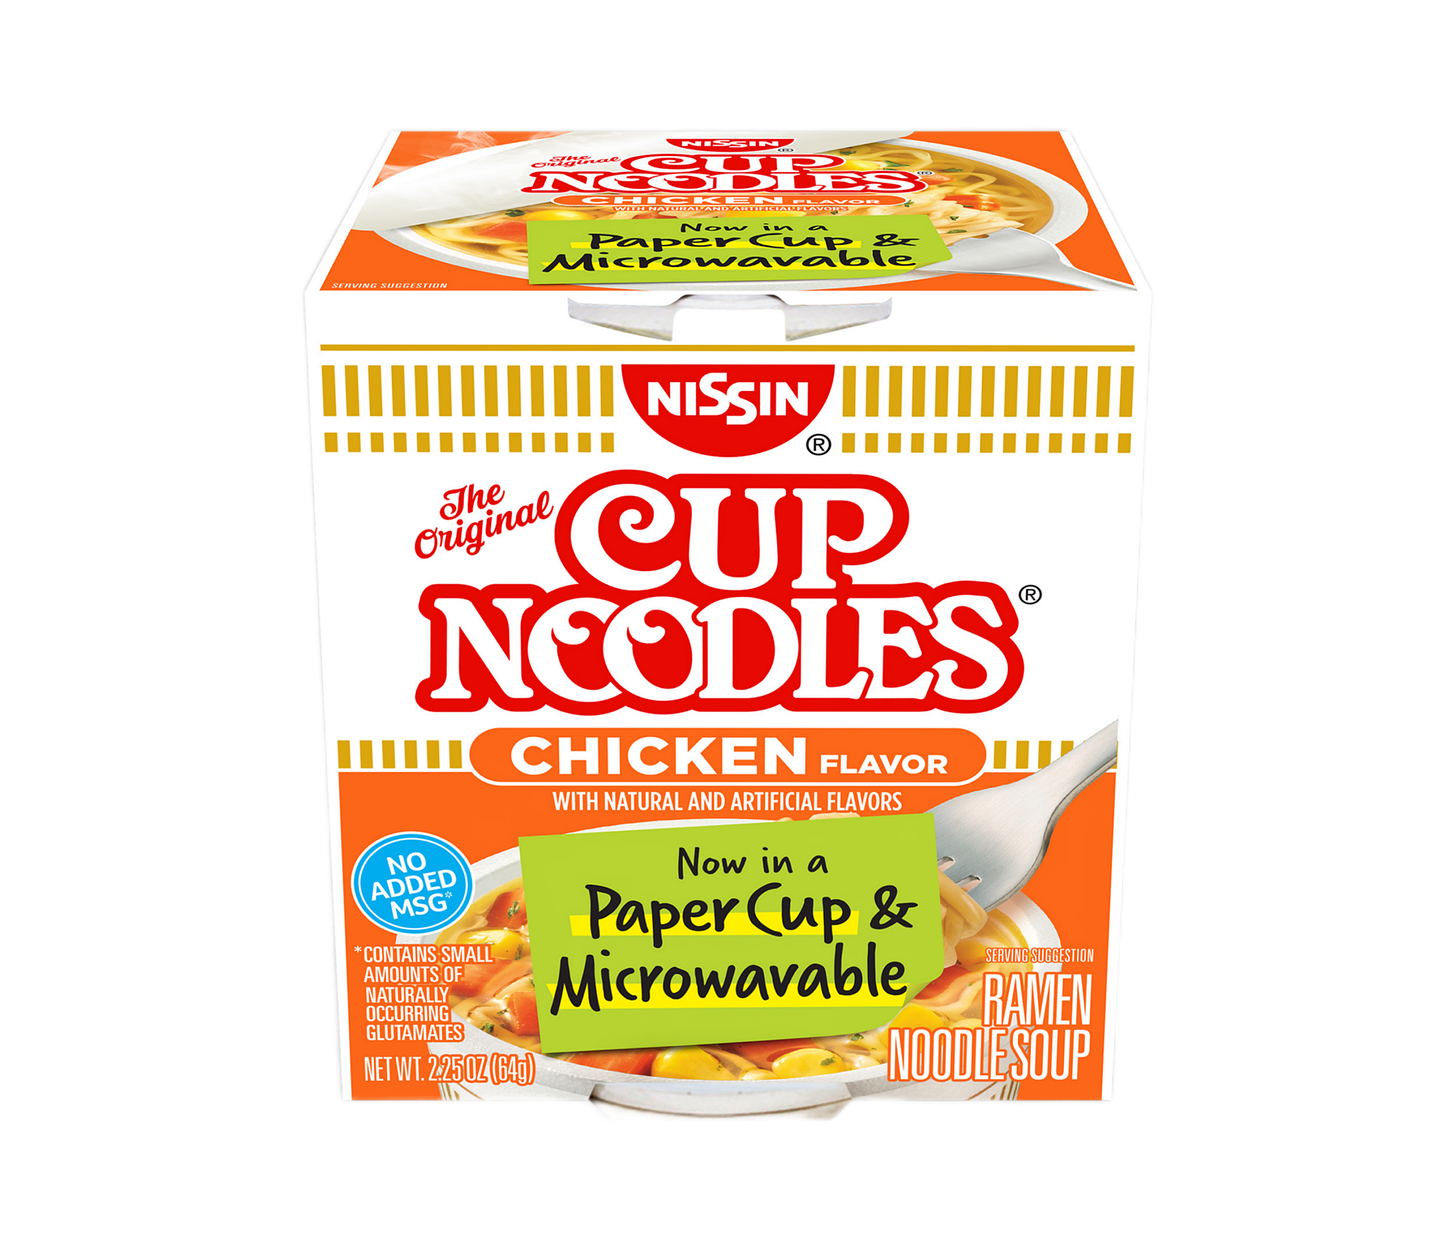 CUP NOODLES® ANNOUNCES NEW PAPER CUP PACKAGING FOR ITS  ICONIC RAMEN NOODLES